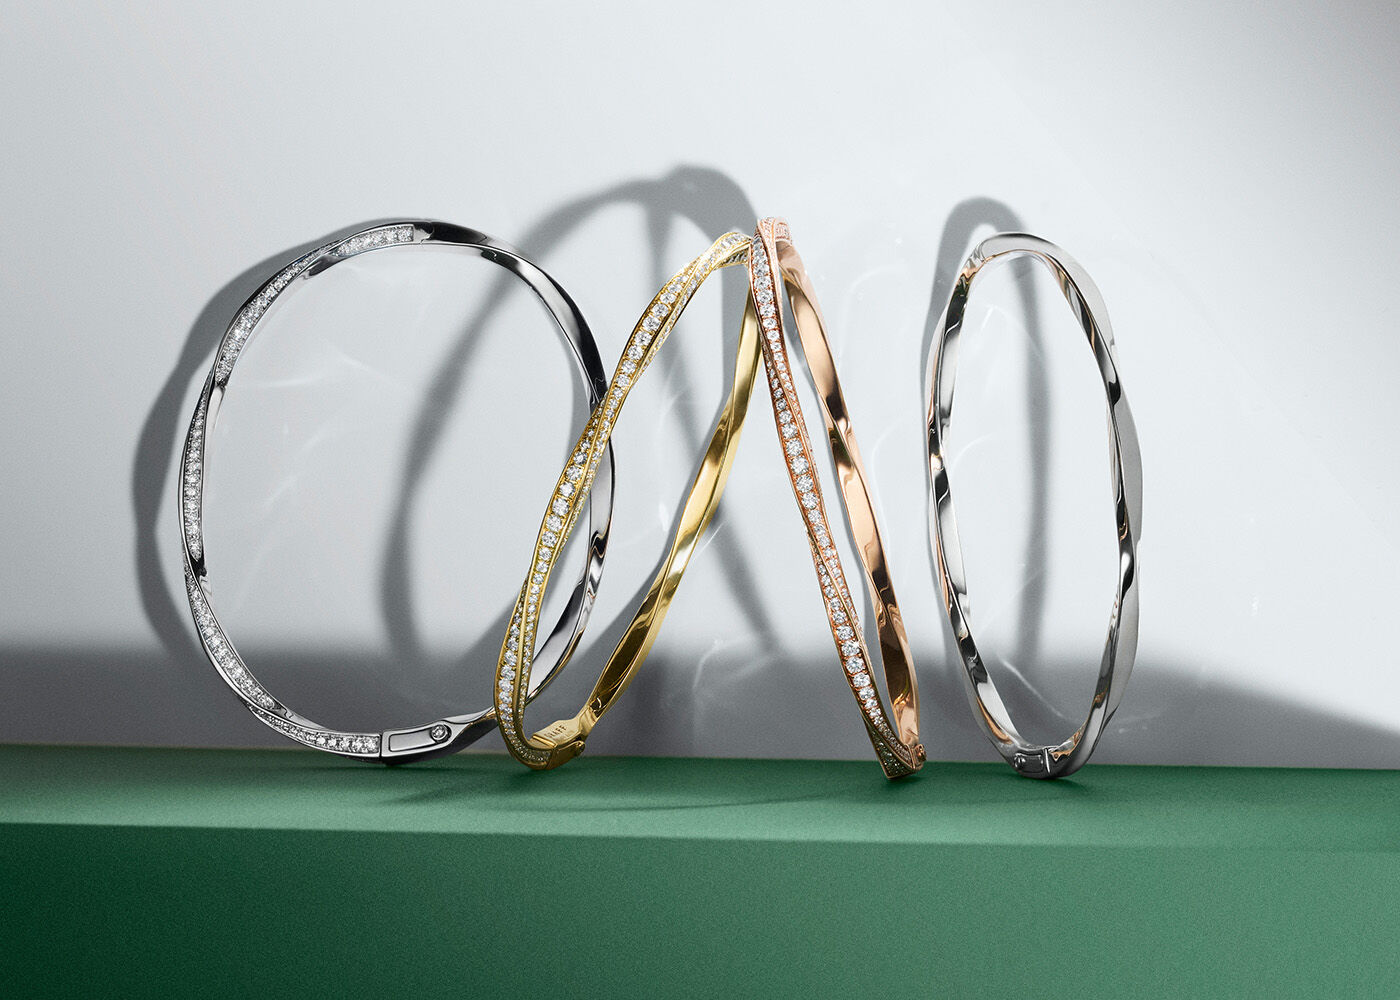 A group of spiral bangles